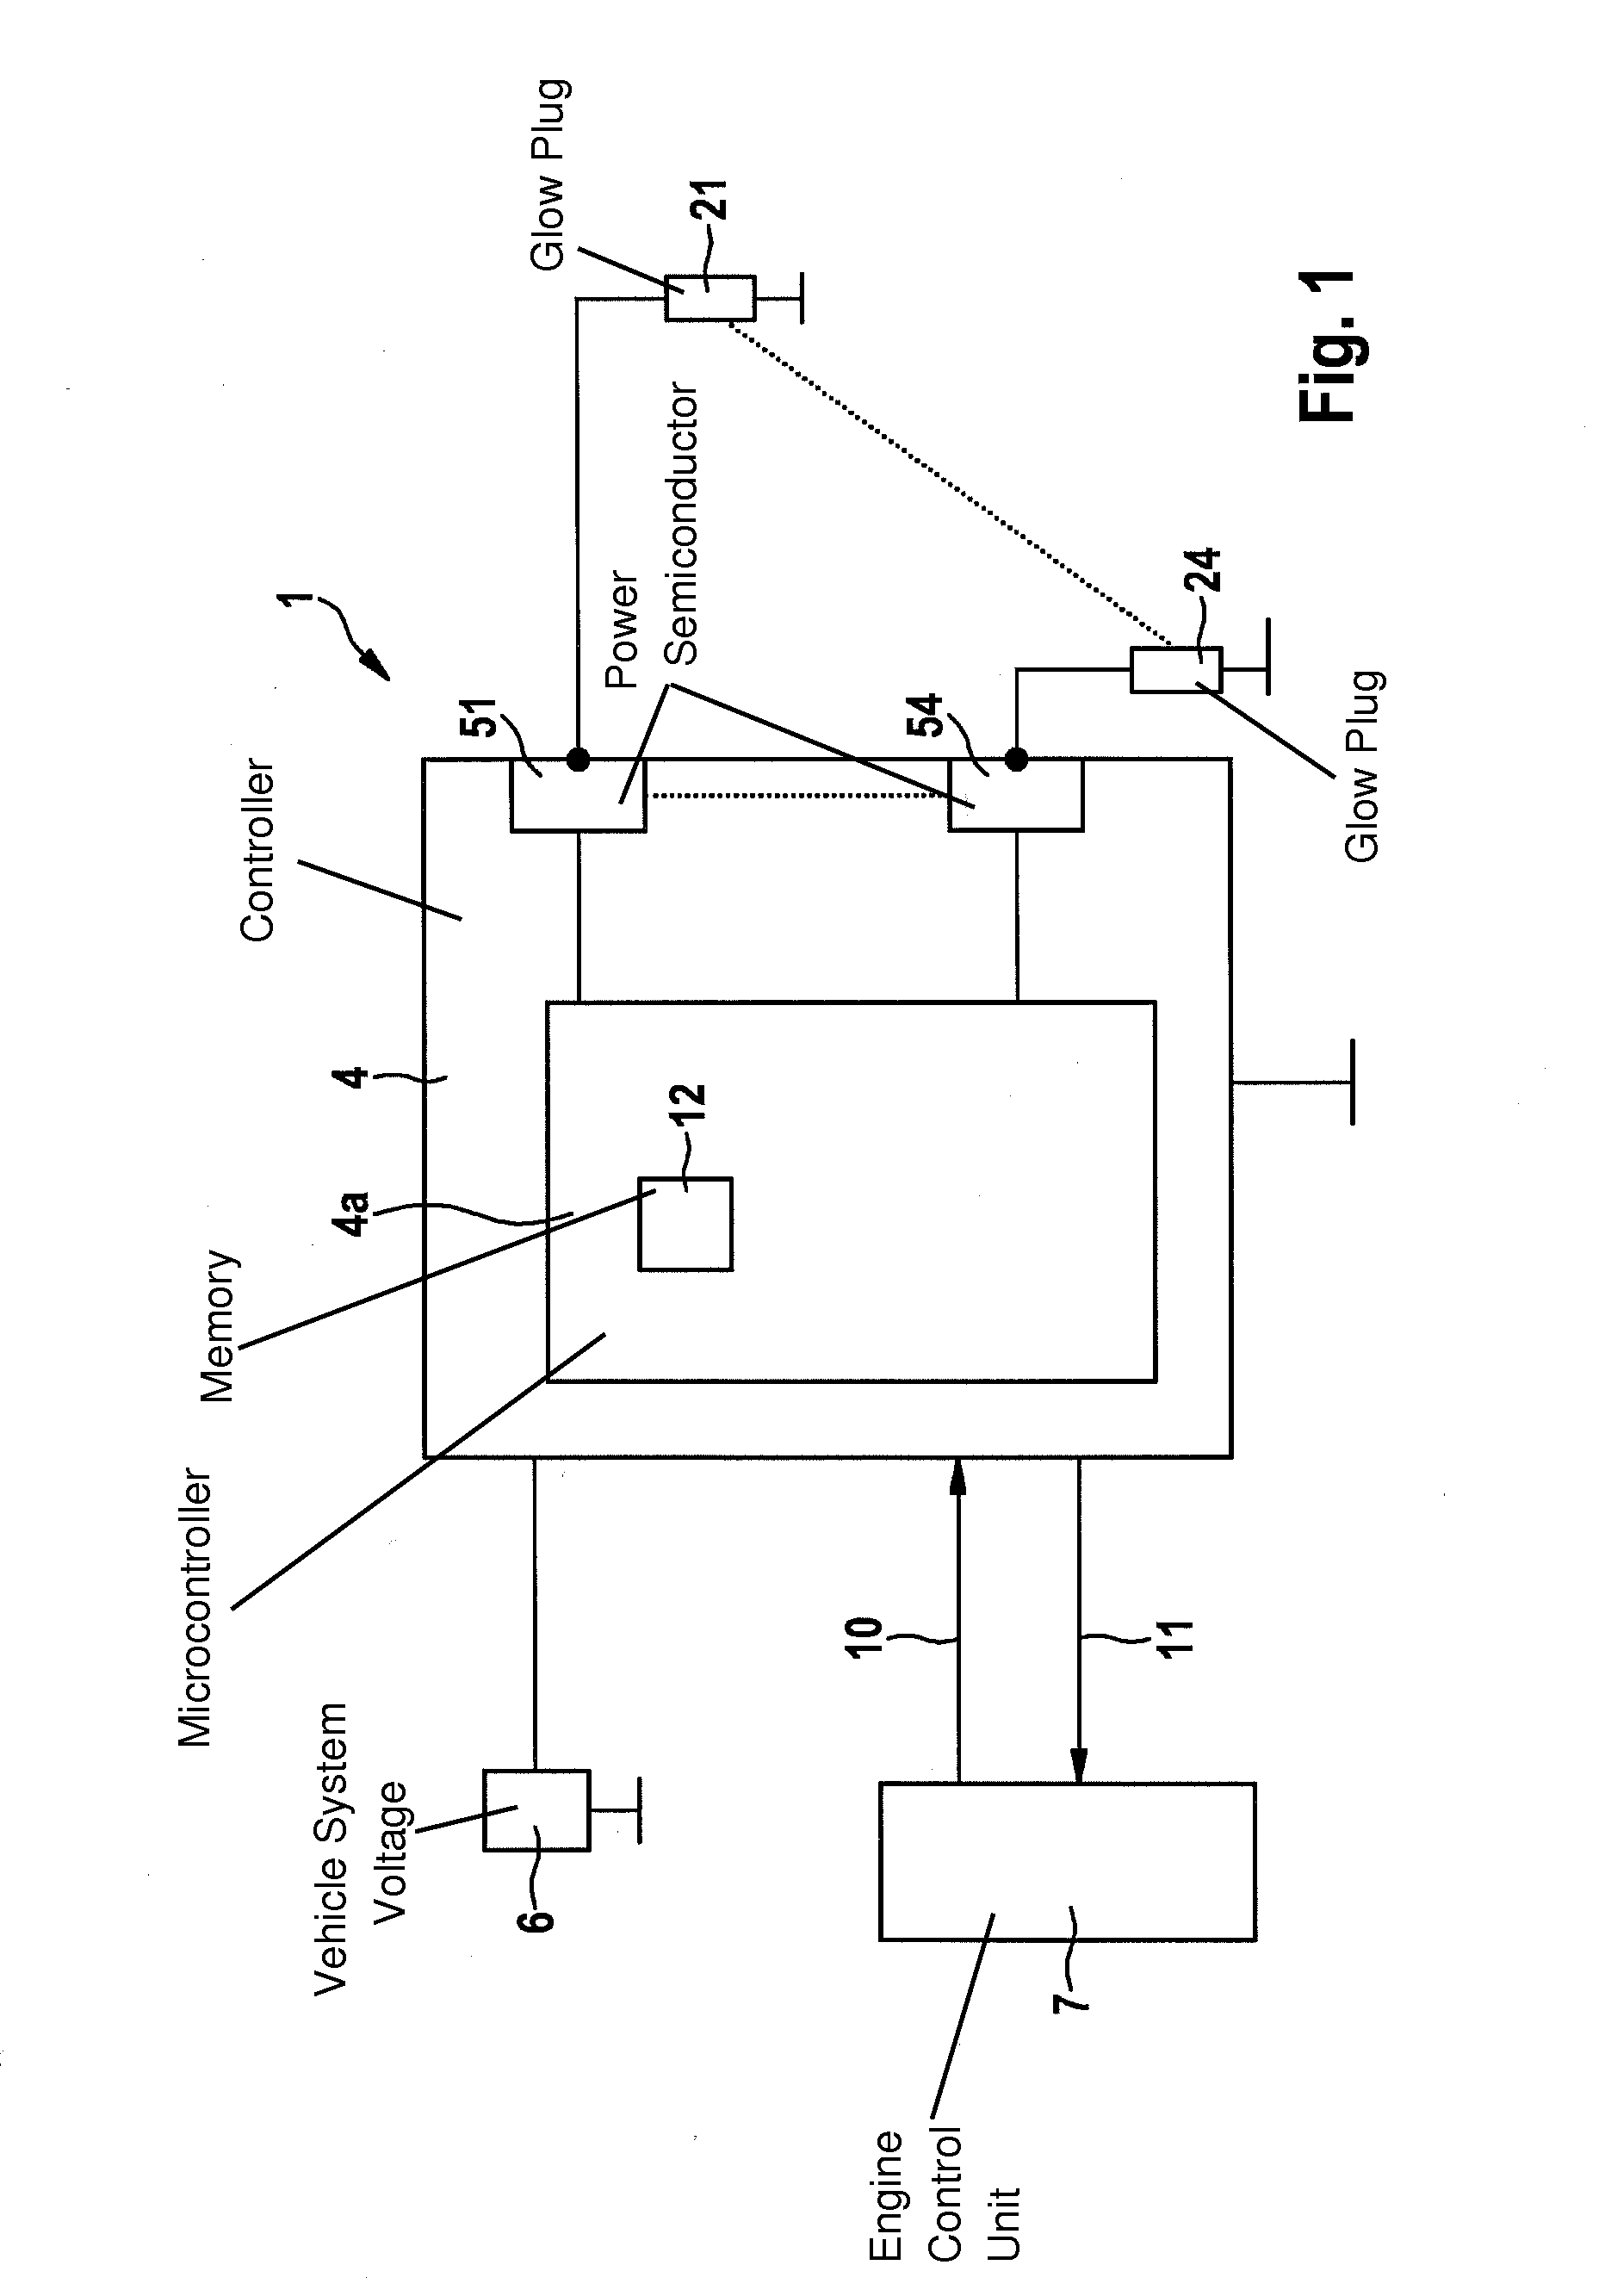 Method and device for determining a temperature of a sheathed-element glow plug during operation in an internal combustion engine